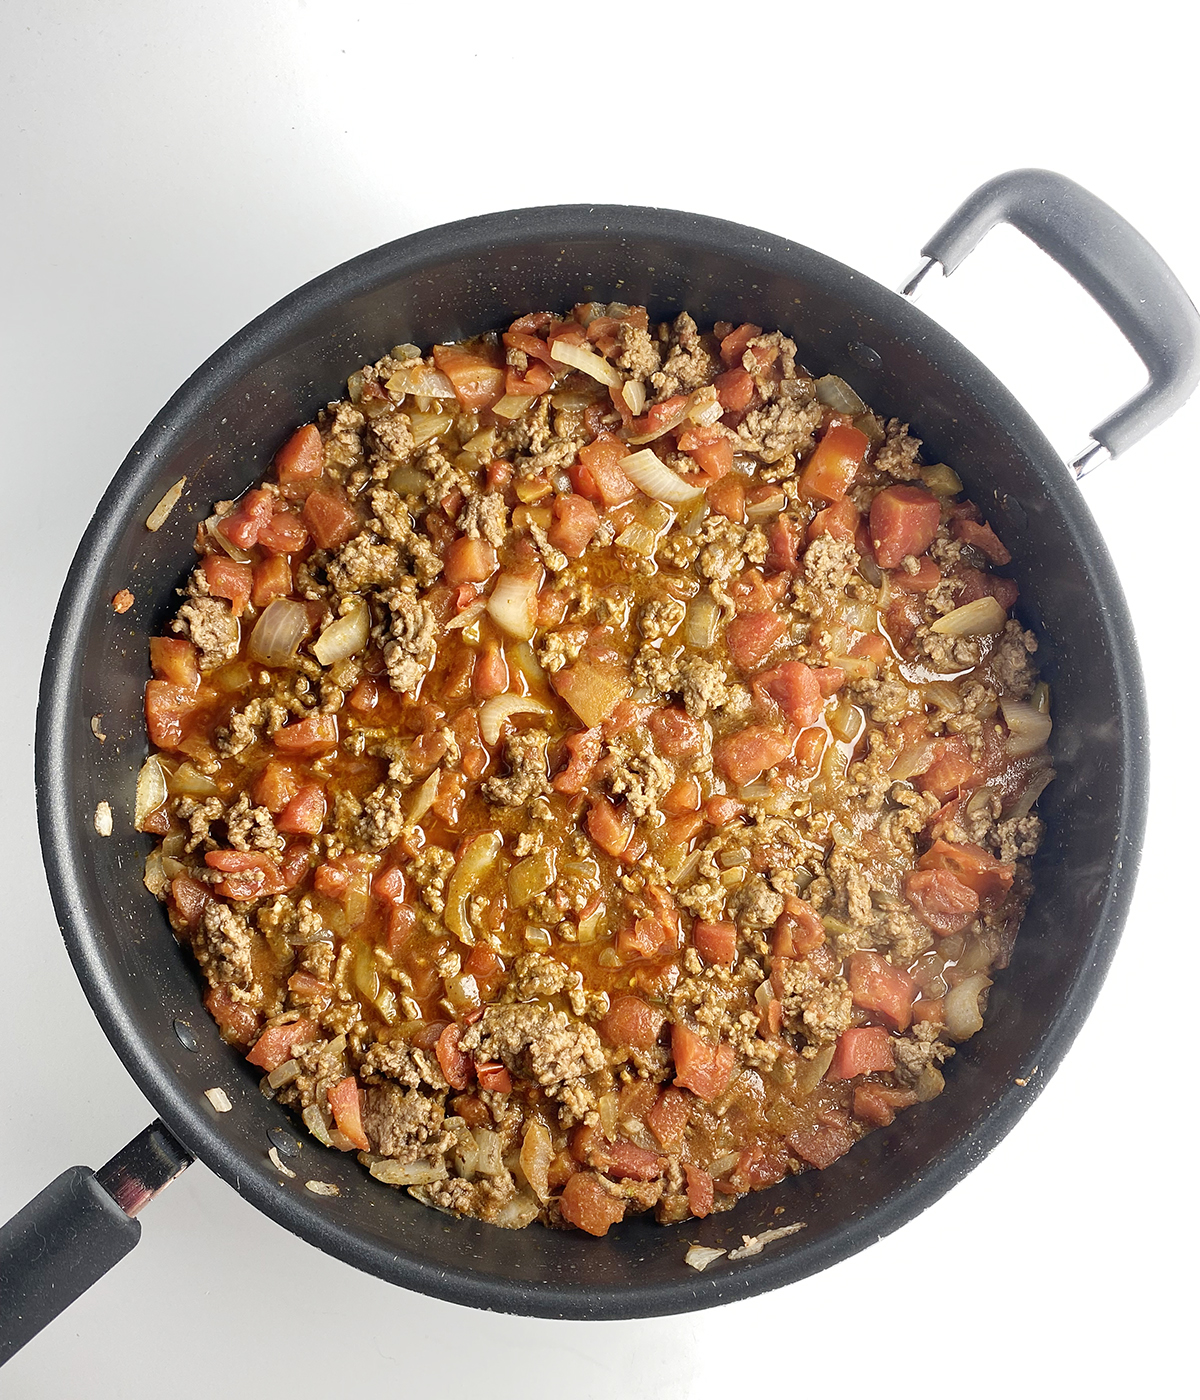 Taco meat cooking in a skillet.